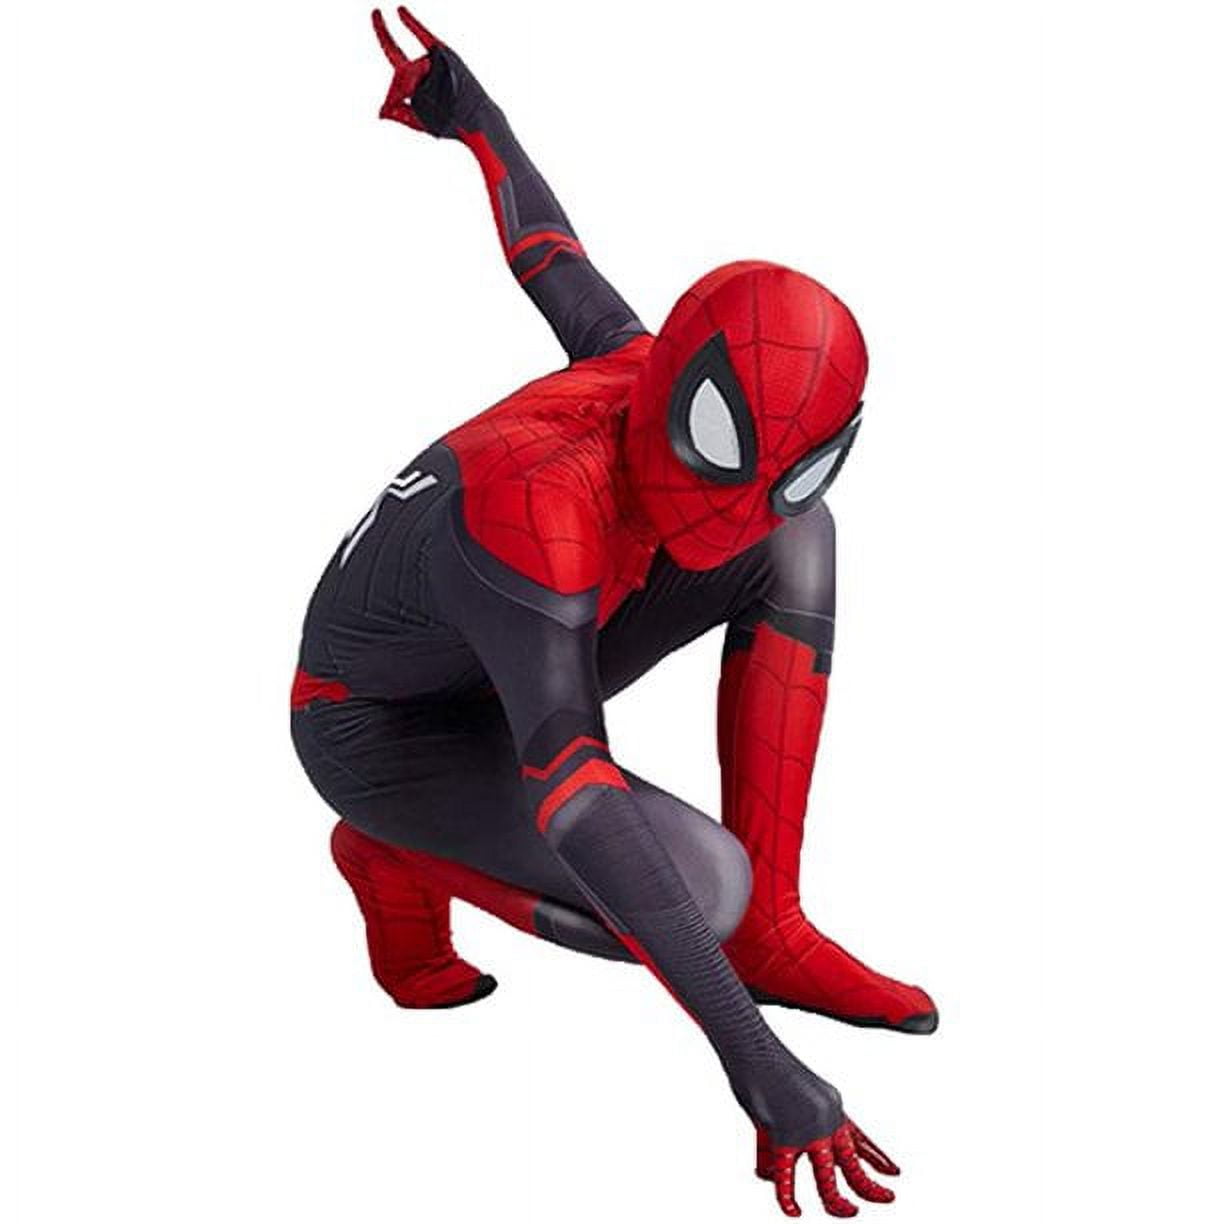 Zendaya Wore Another 'Spider-Man'-Themed Outfit on the Red Carpet